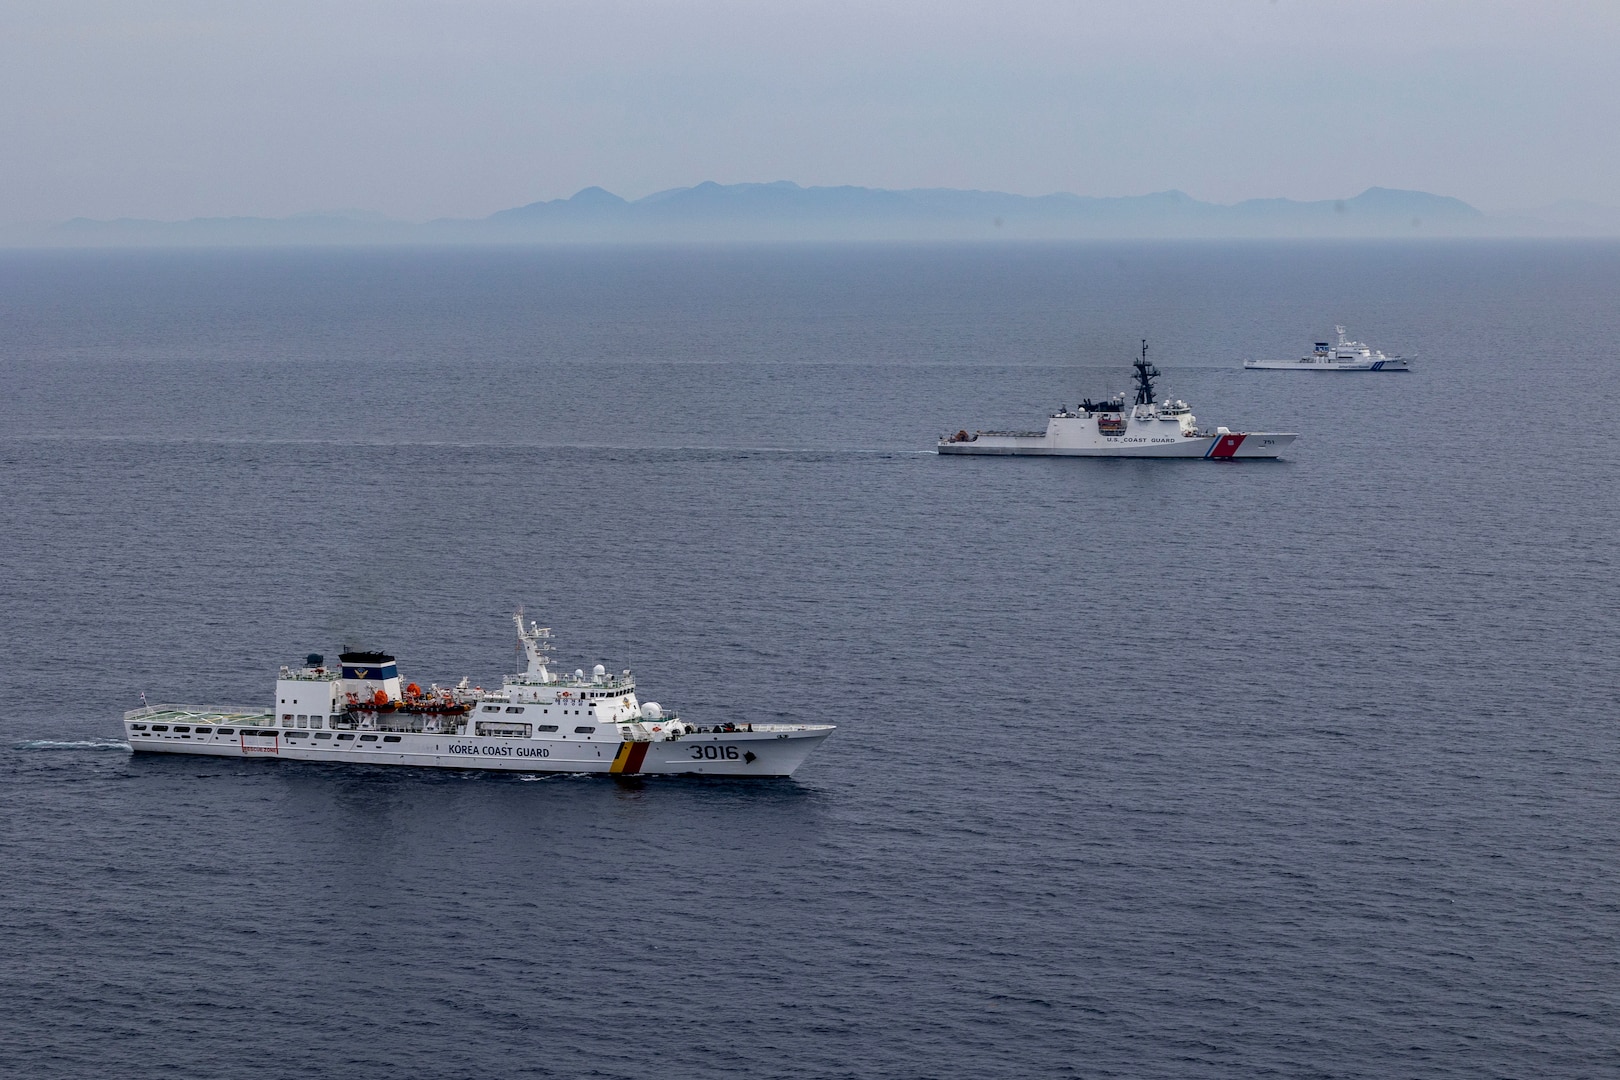 Republic of Korea Coast Guard vessel KCG Taepyongyang (KCG-3016), U.S. Coast Guard Cutter Waesche (WMSL-751) and Japan Coast Guard vessel JCGC Wakasa (PL-93) patrol in formation during a trilateral exercise in the East Sea, June 6, 2024. Coast Guardsmen from Japan, Republic of Korea and the United States used the trilateral exercise as an opportunity to rehearse cohesion between the nations when operating together. U.S. Coast Guard missions in the Indo-Pacific focus on issues directly supporting and advancing our regional partners’ efforts to protect fish stocks, ensure safety of life at sea, support environmental response, and provide disaster relief. (U.S. Marine Corps photo by Cpl. Elijah Murphy